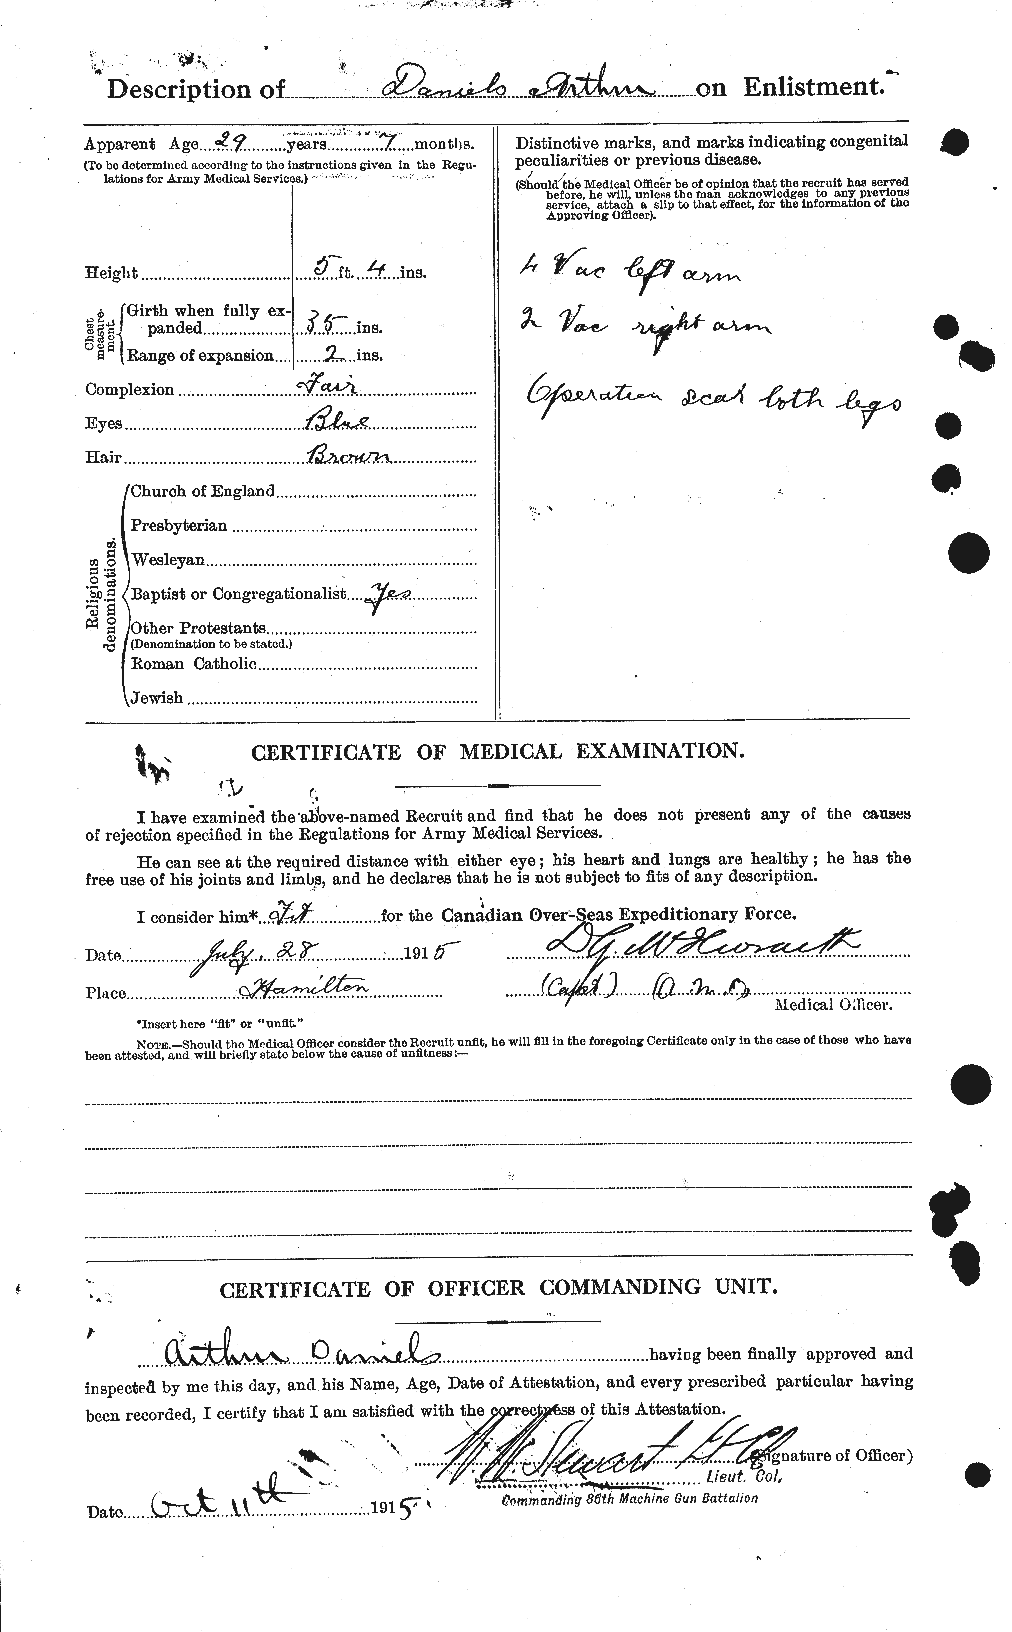 Personnel Records of the First World War - CEF 279569b